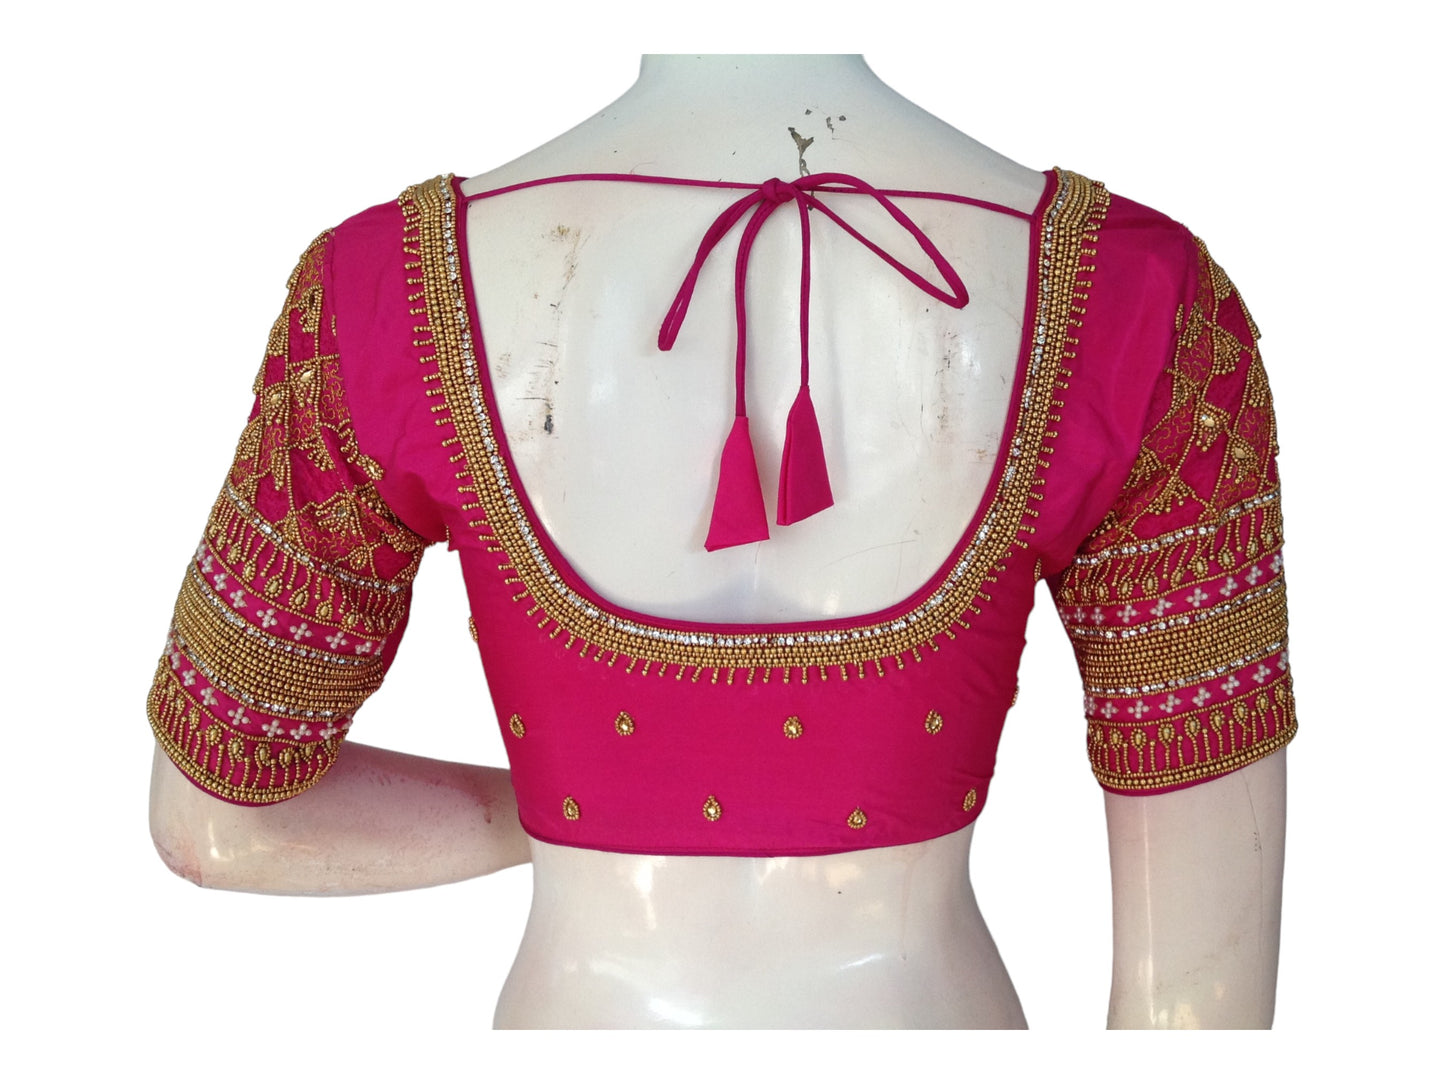 "Pink Aari Dreams: Readymade Blouses for Your Fairytale Wedding, featuring exquisite hand-embroidery and luxurious design."